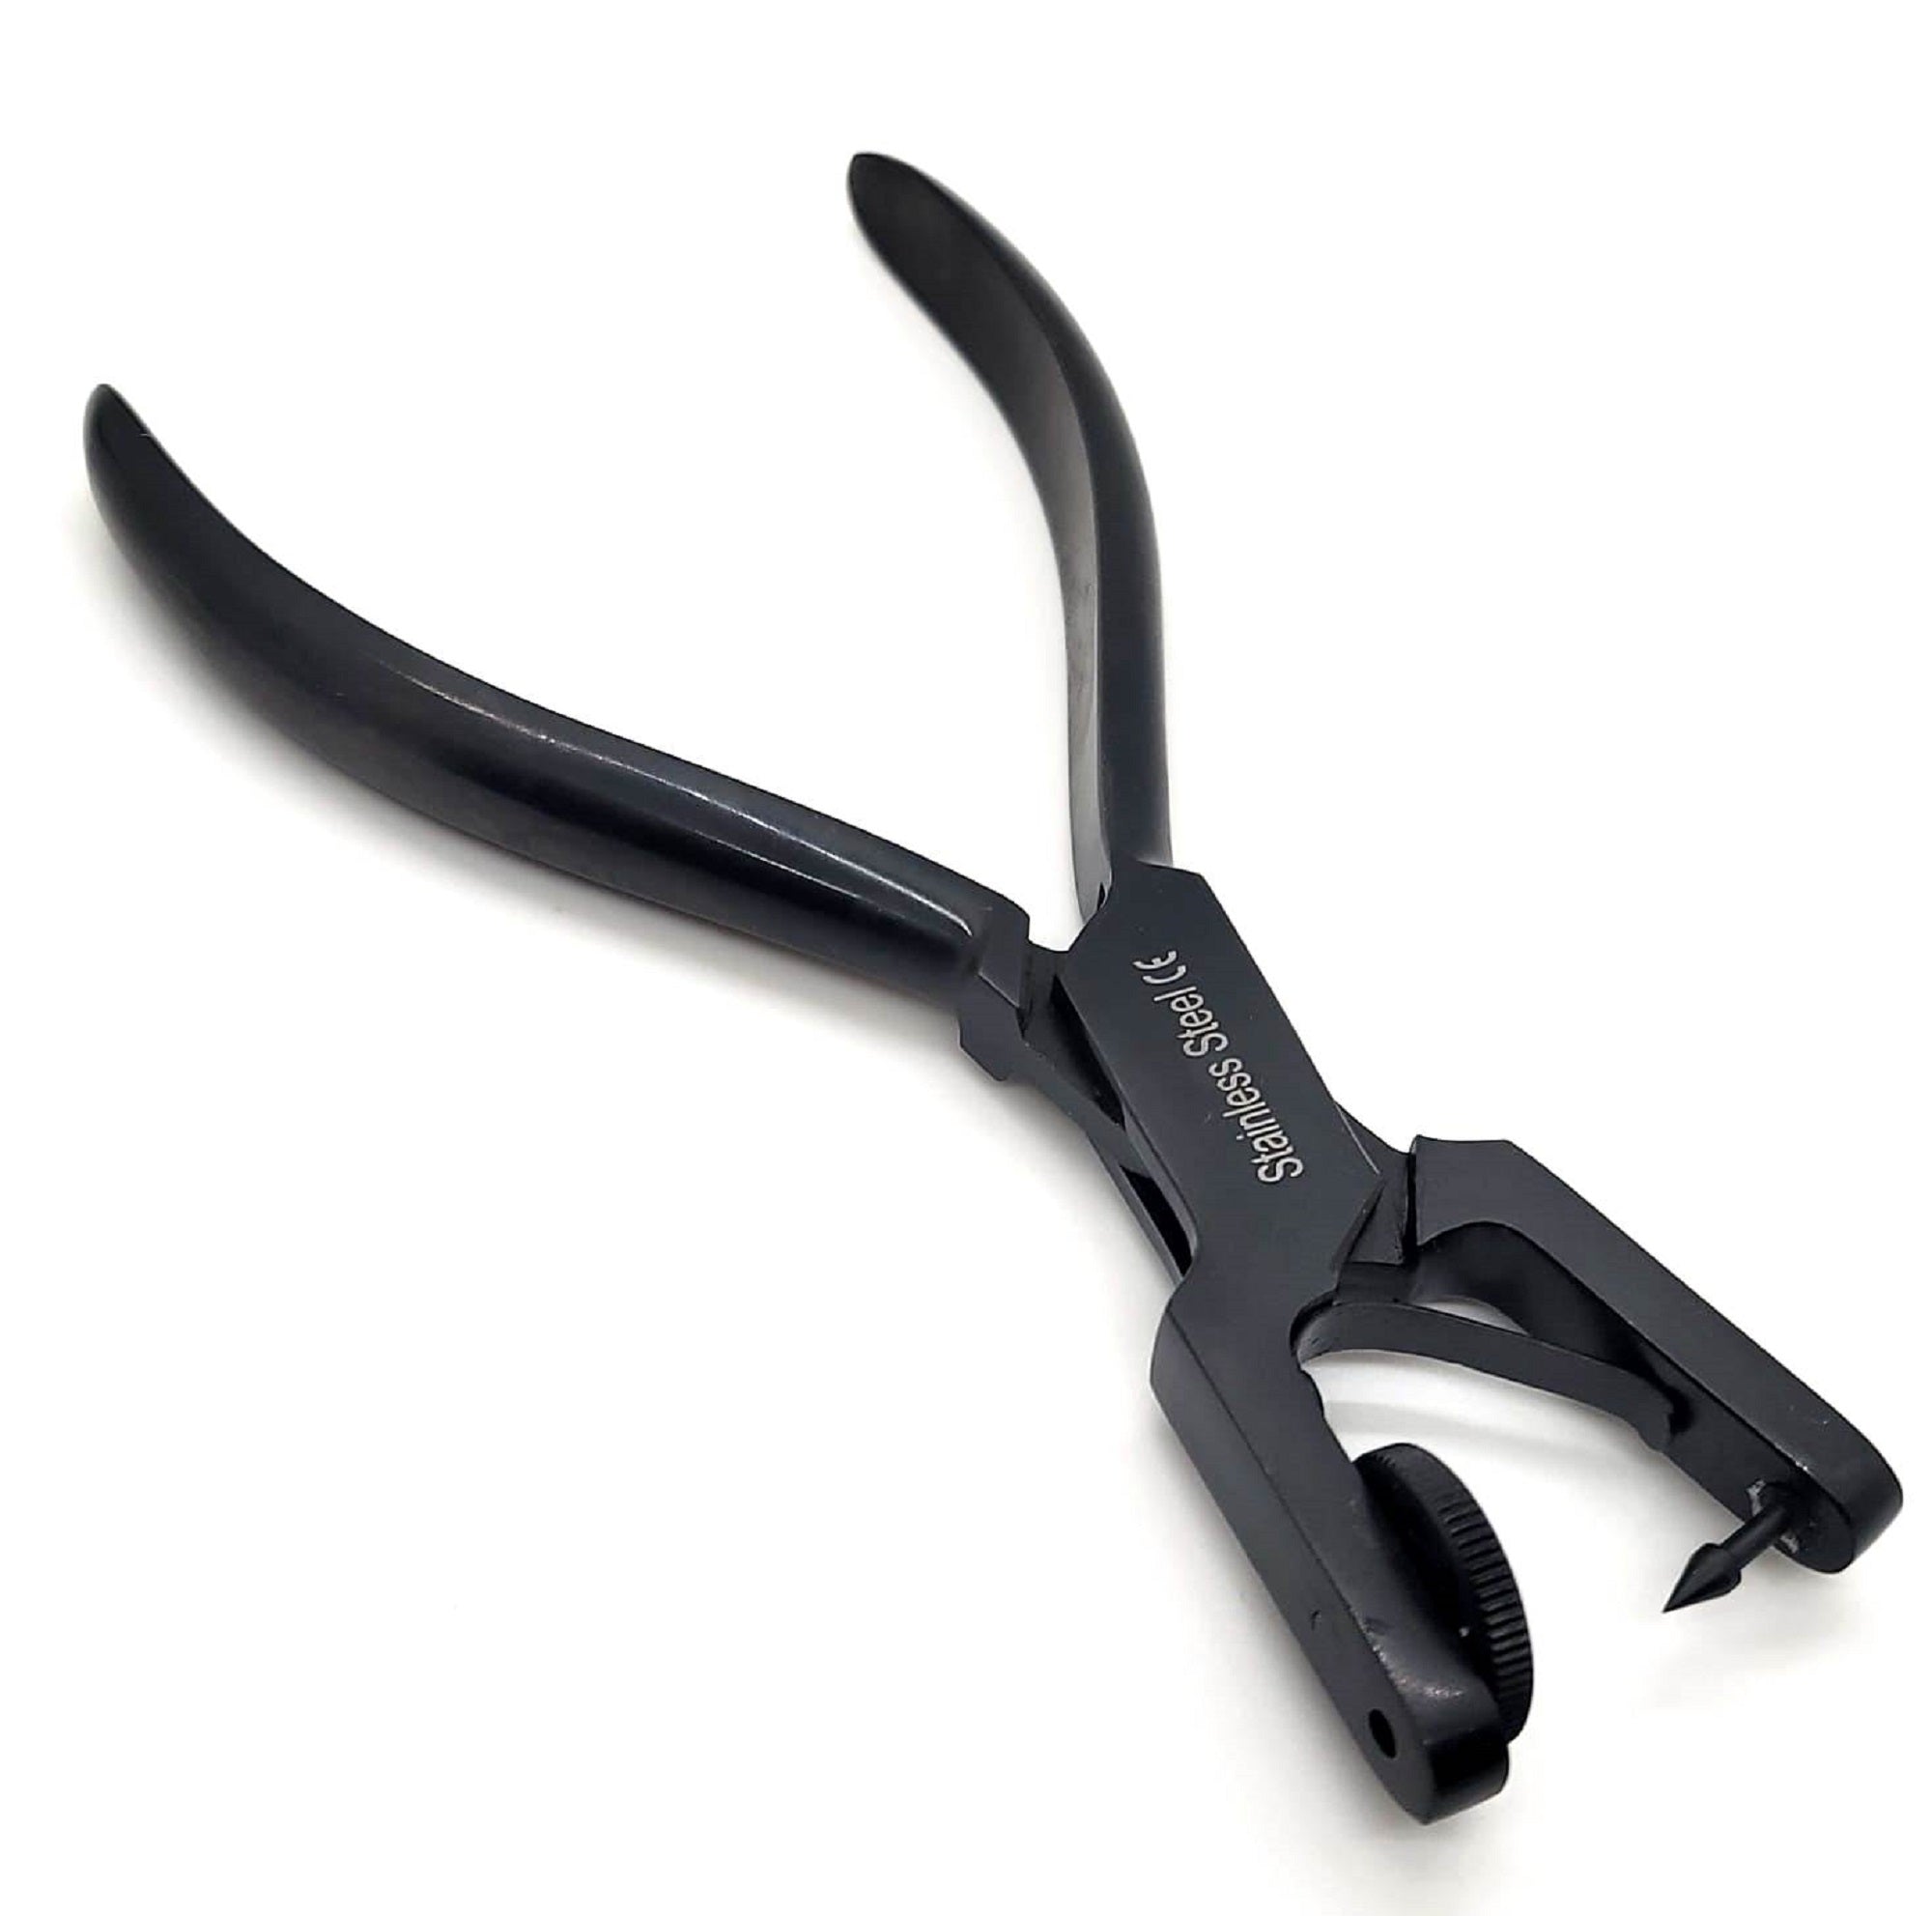 Hand Held Hole Punch, Leather Belt Hole Puncher Pliers Hand Tool